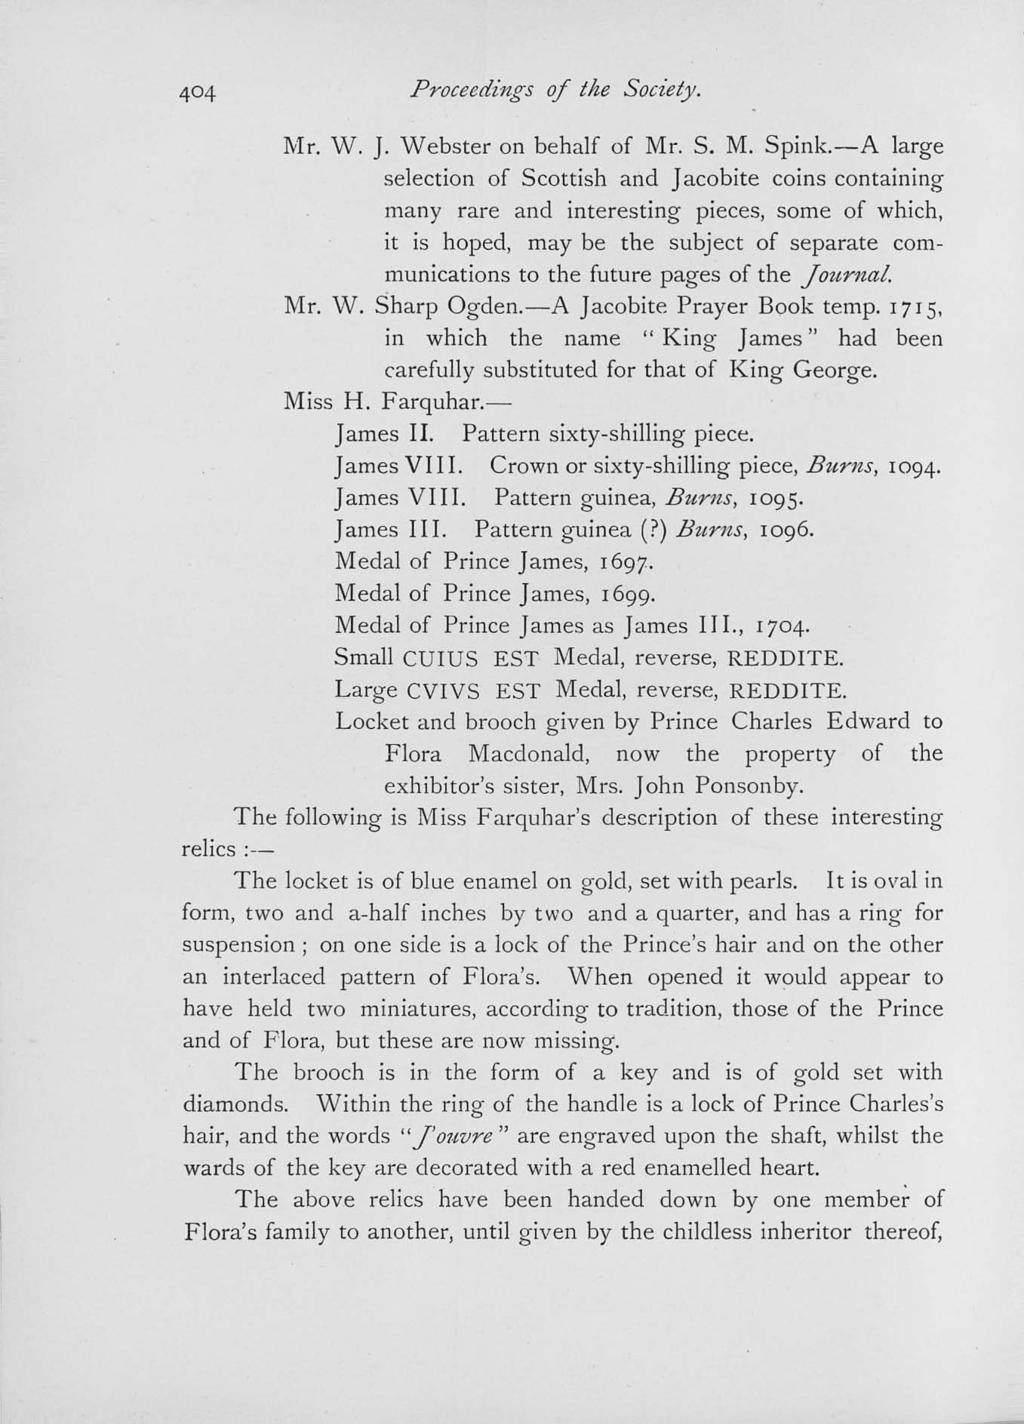 Proceedings of the Society. Mr. W. J. Webster on behalf of Mr. S. M. Spink.